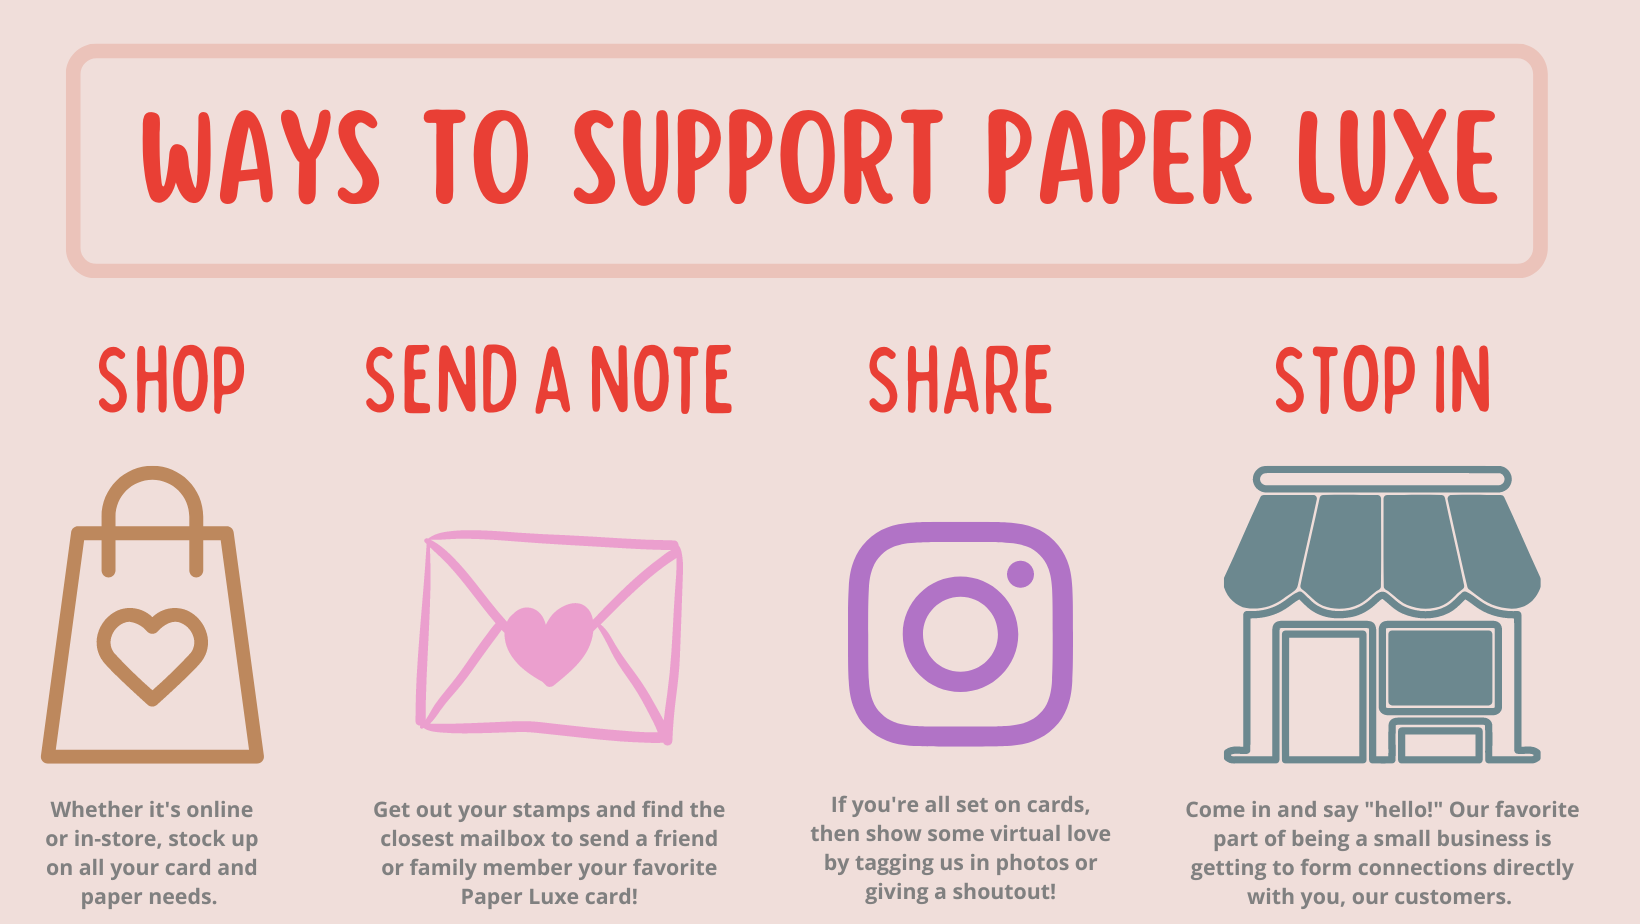 The head line reads, "Ways to Support Paper Luxe."  You can support through shopping, sending a letter or card, sharing the shop on social media, or stopping in the store to say "hello!"